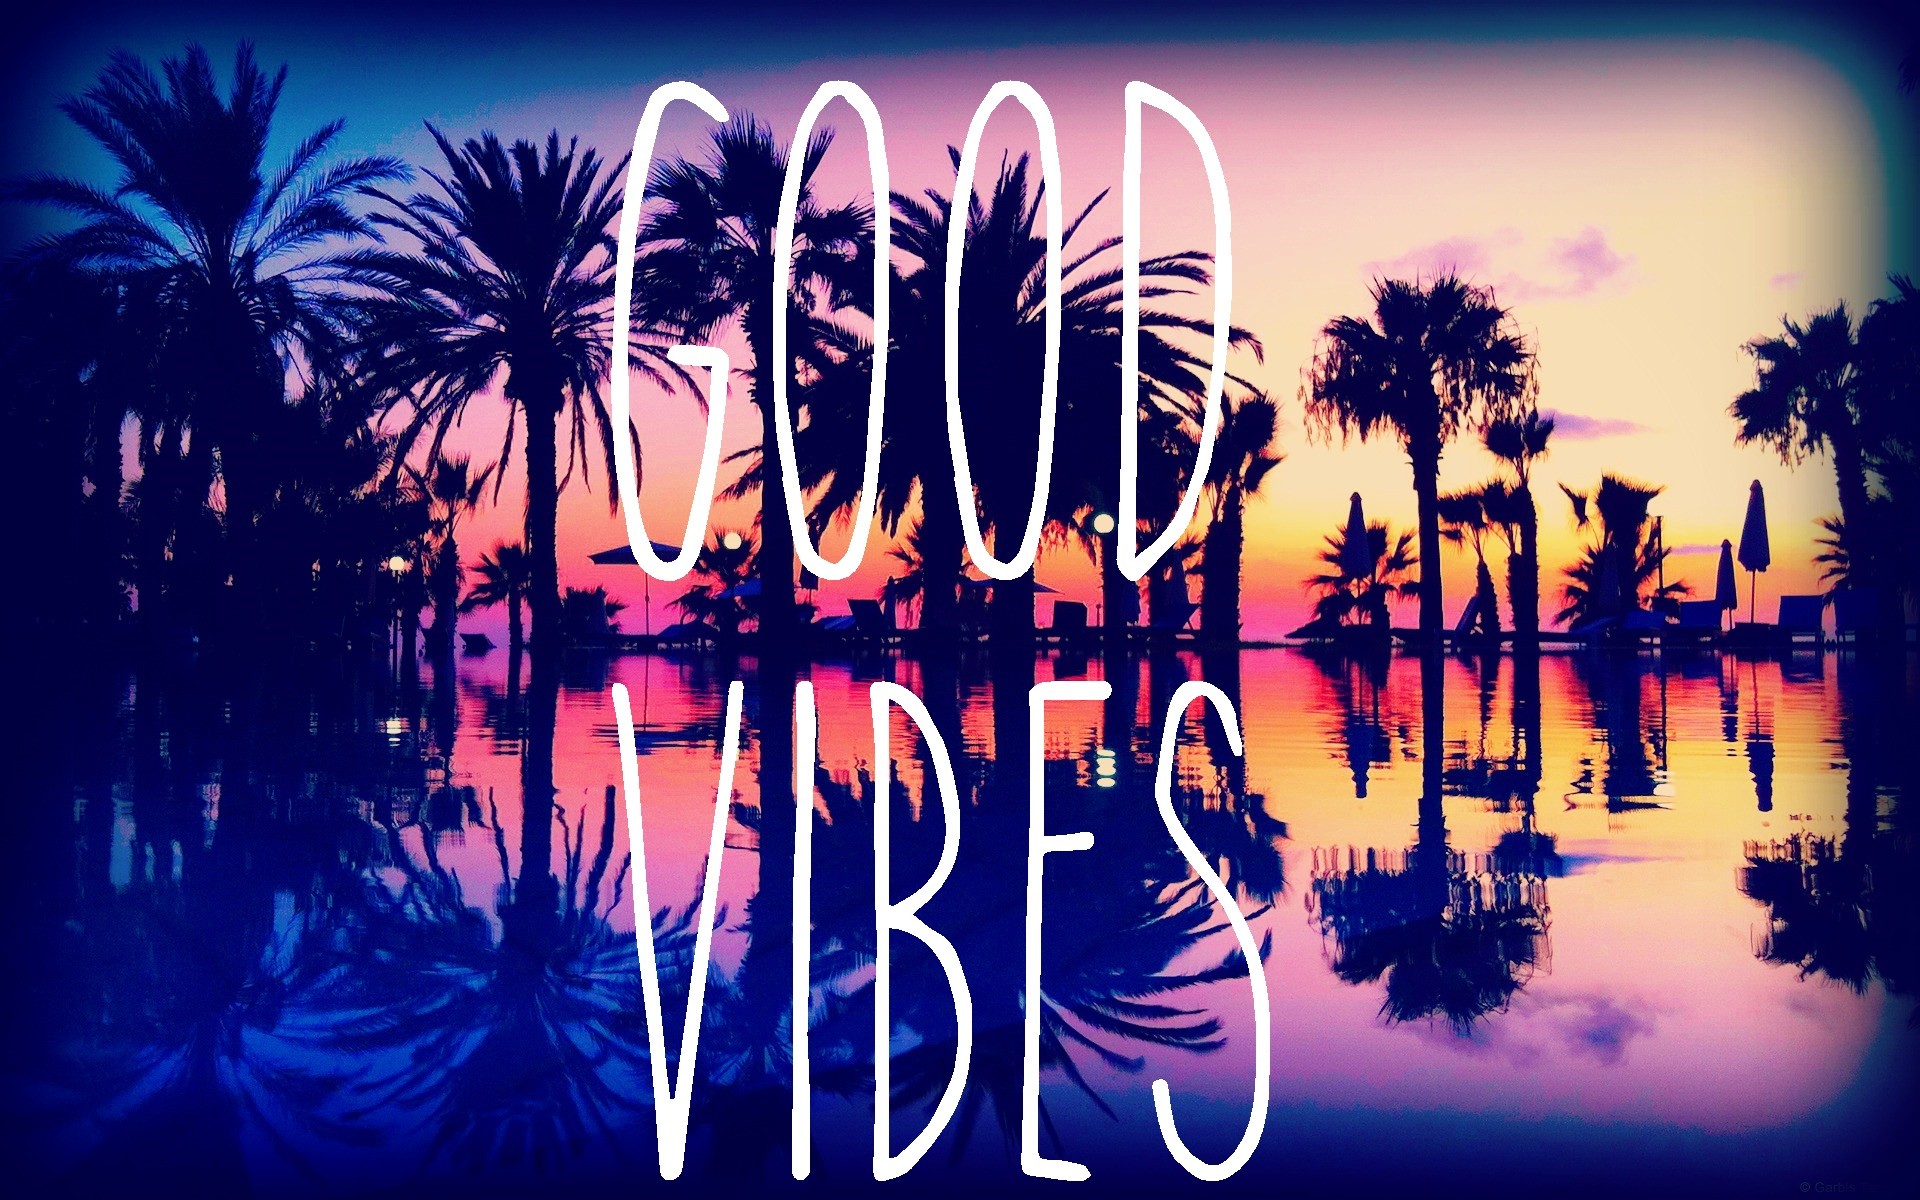 Good Vibes Wallpaper (72+ images)